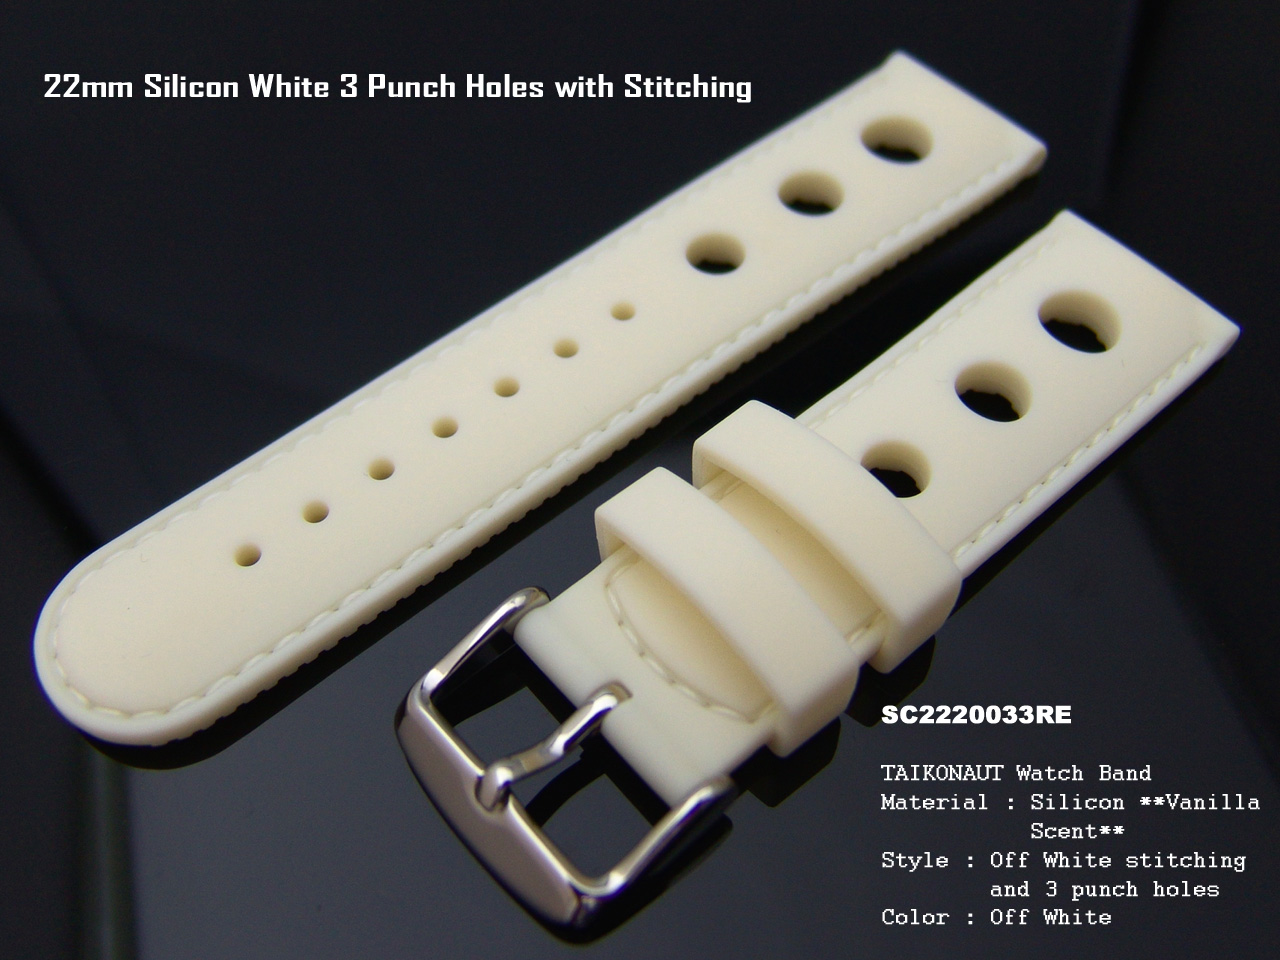 22mm White Soft Silicone Diver Watch Band Hole Punch Watch Strap